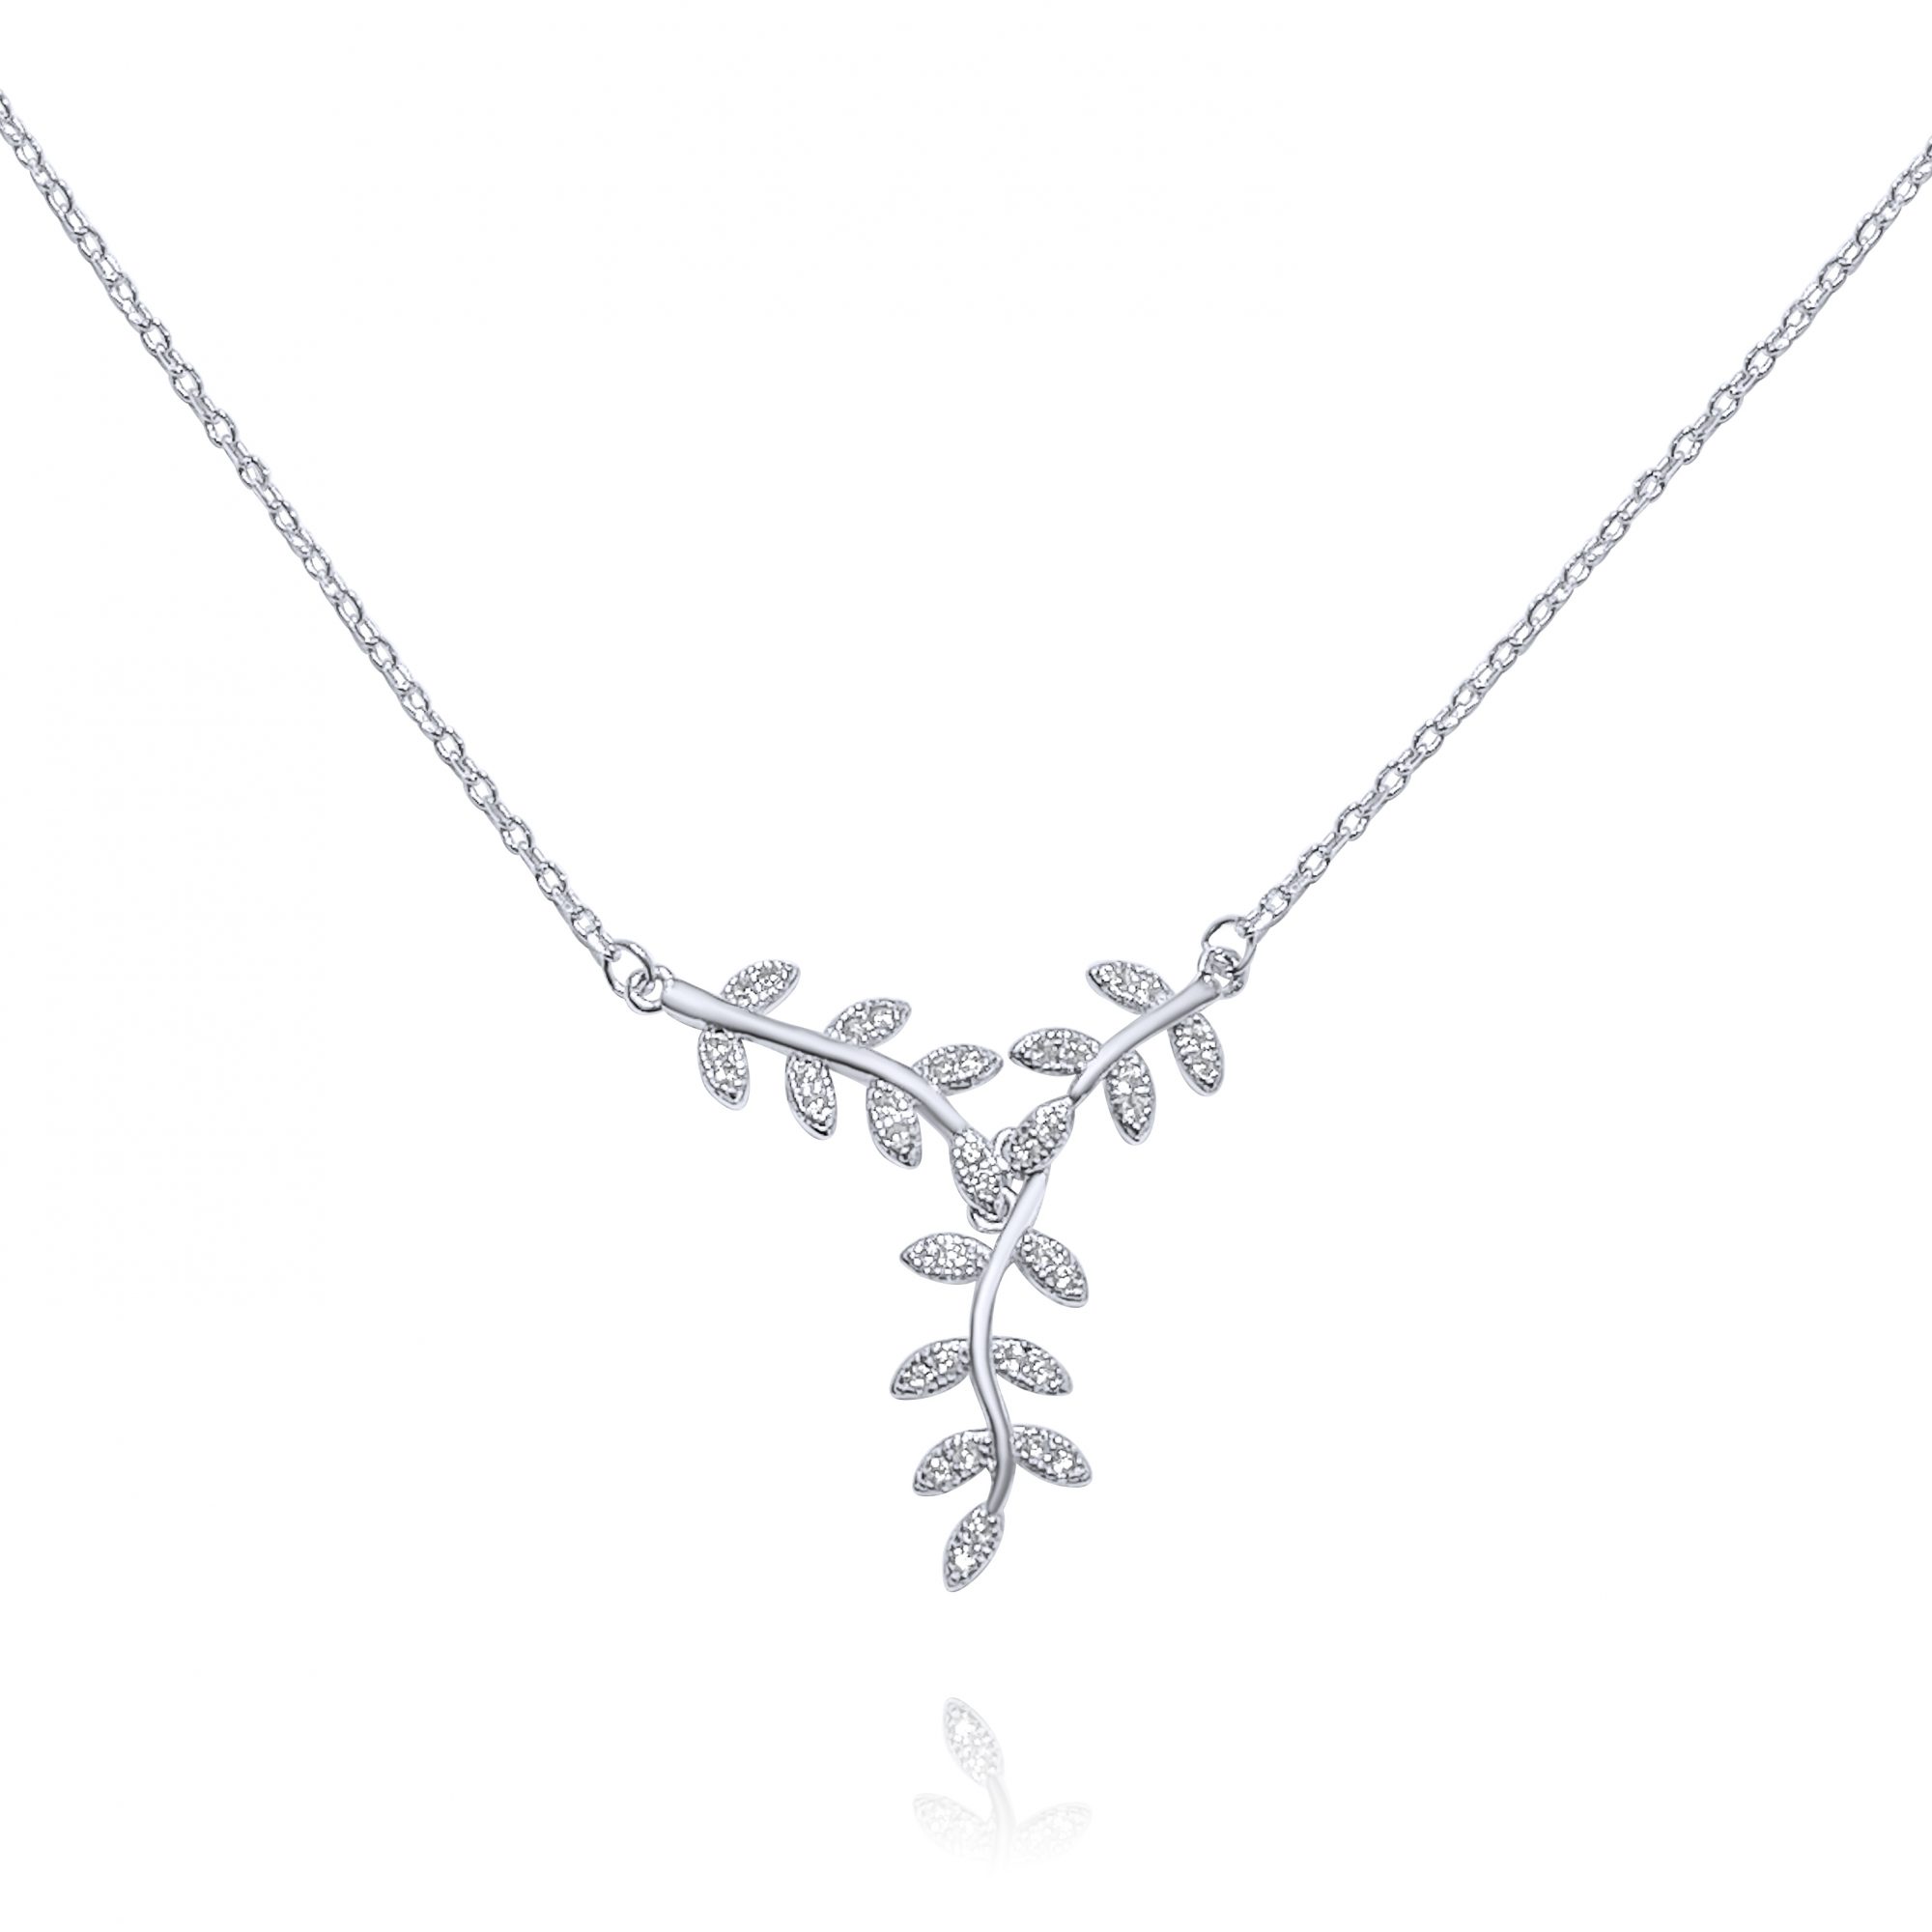 Olive branch silver necklace with zircon stones